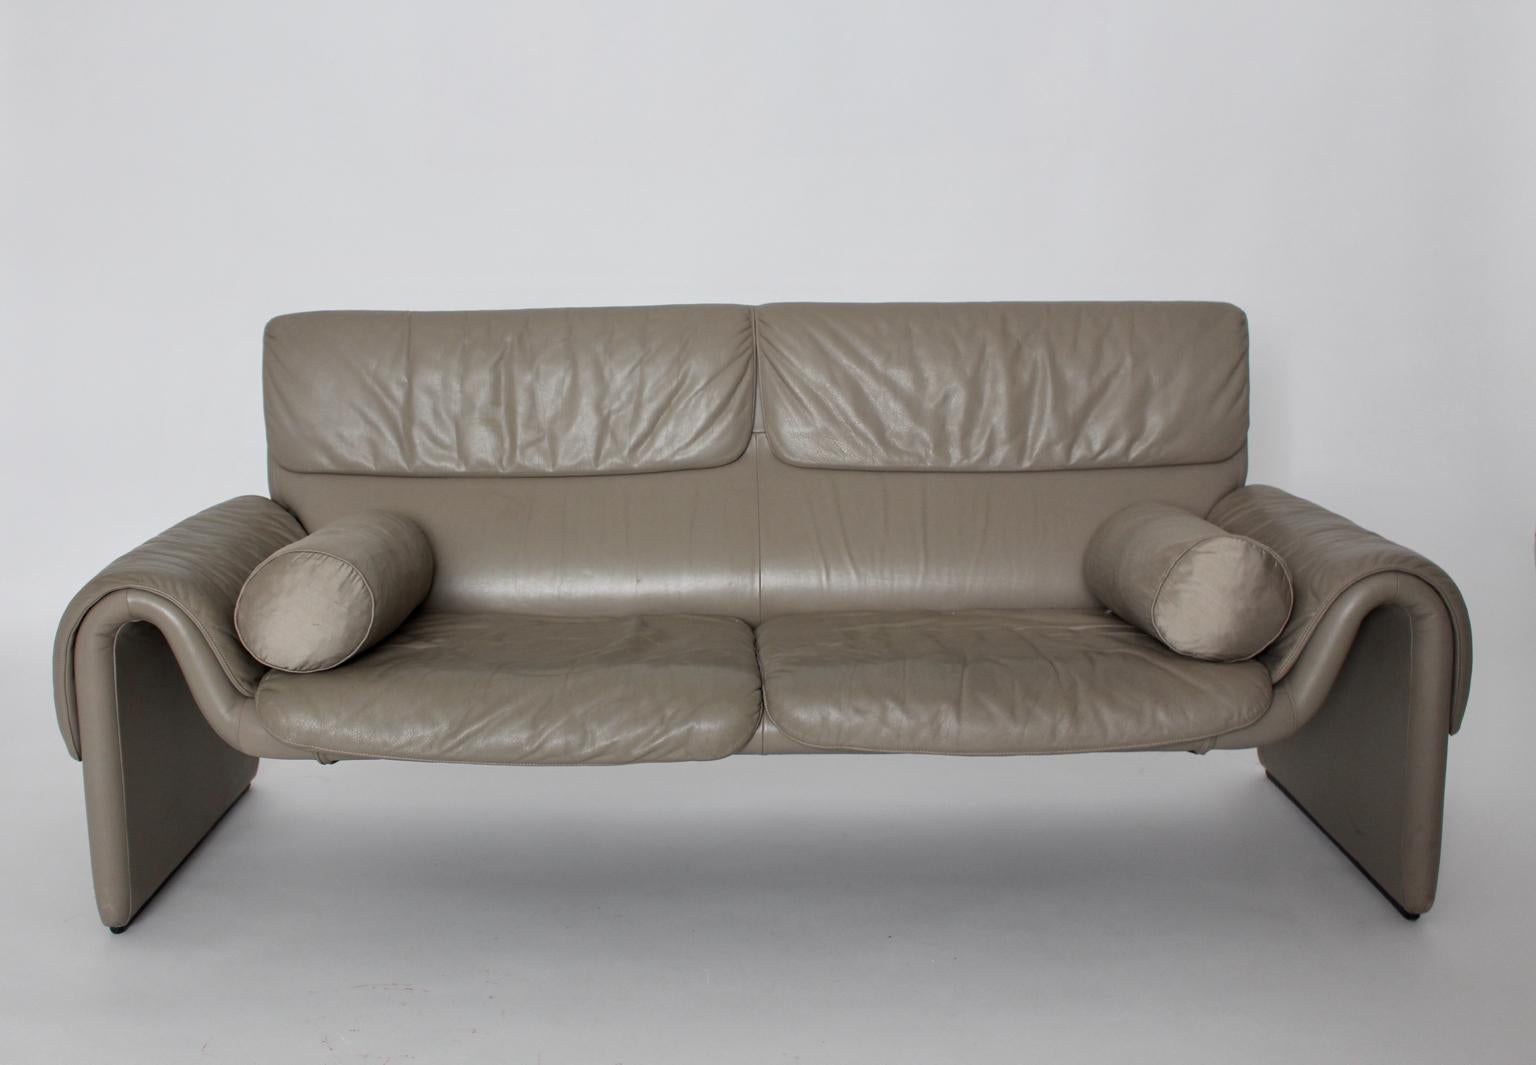 Late 20th Century Modernist Vintage Grey Leather Bench Loveseat De Sede 1980s Switzerland For Sale